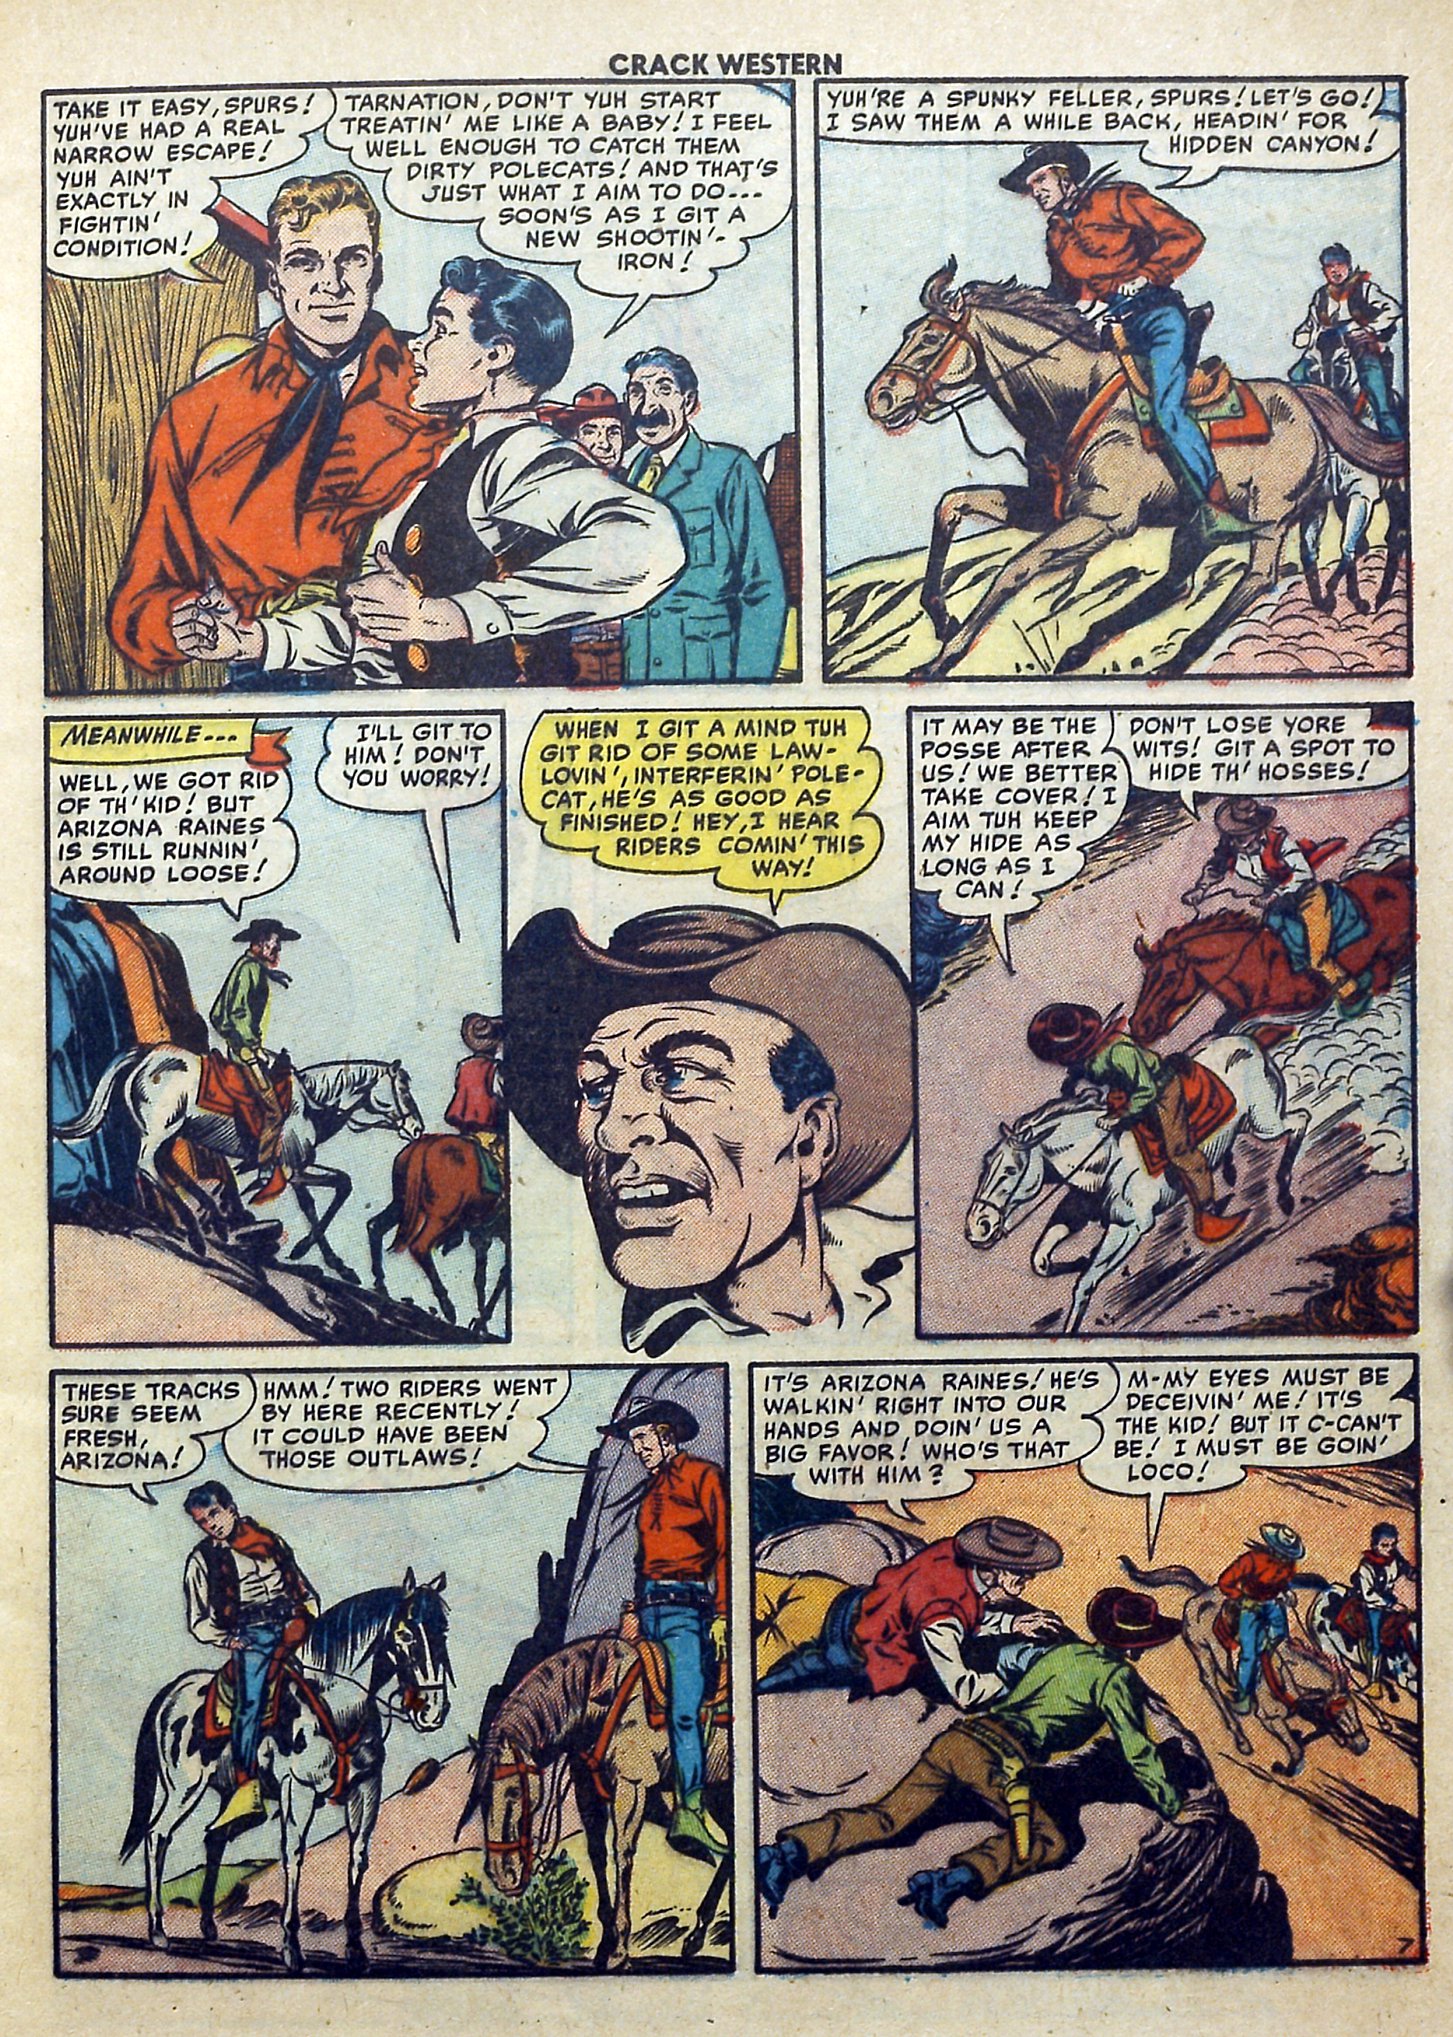 Read online Crack Western comic -  Issue #79 - 9